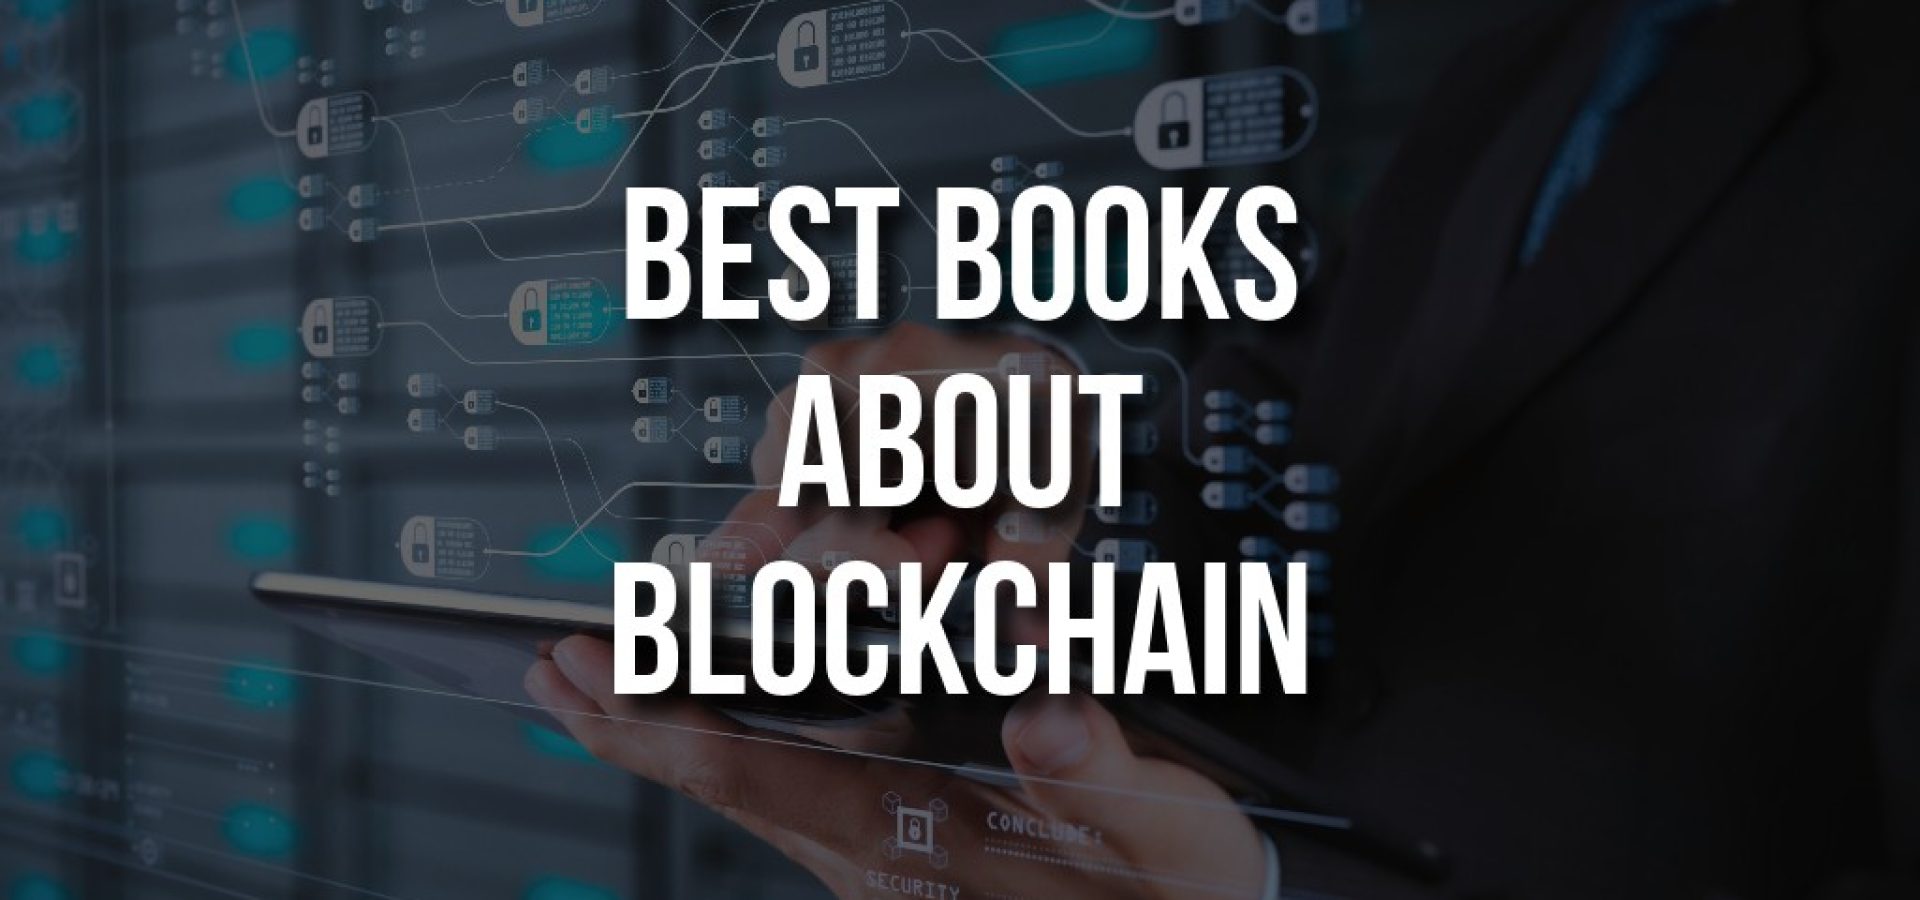 Best books about blockchain you should know